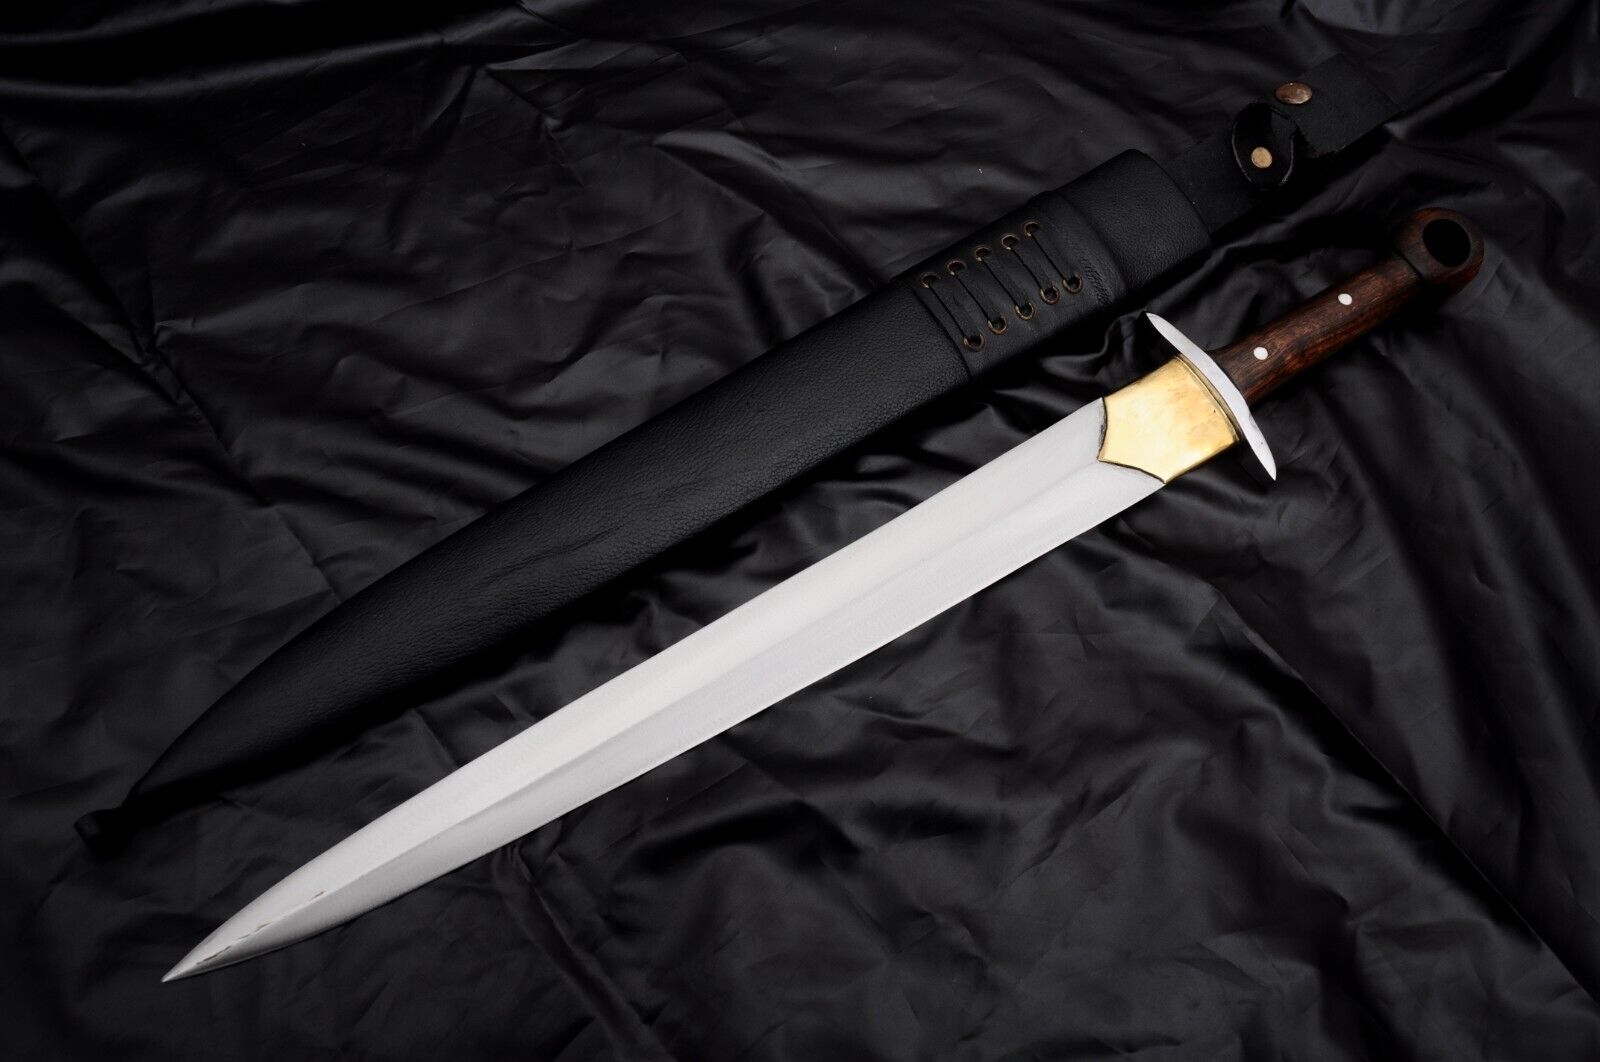 lord of rings Merry Sword-Handmade sword-Handmade-hunting, Tactical Sword-Forged